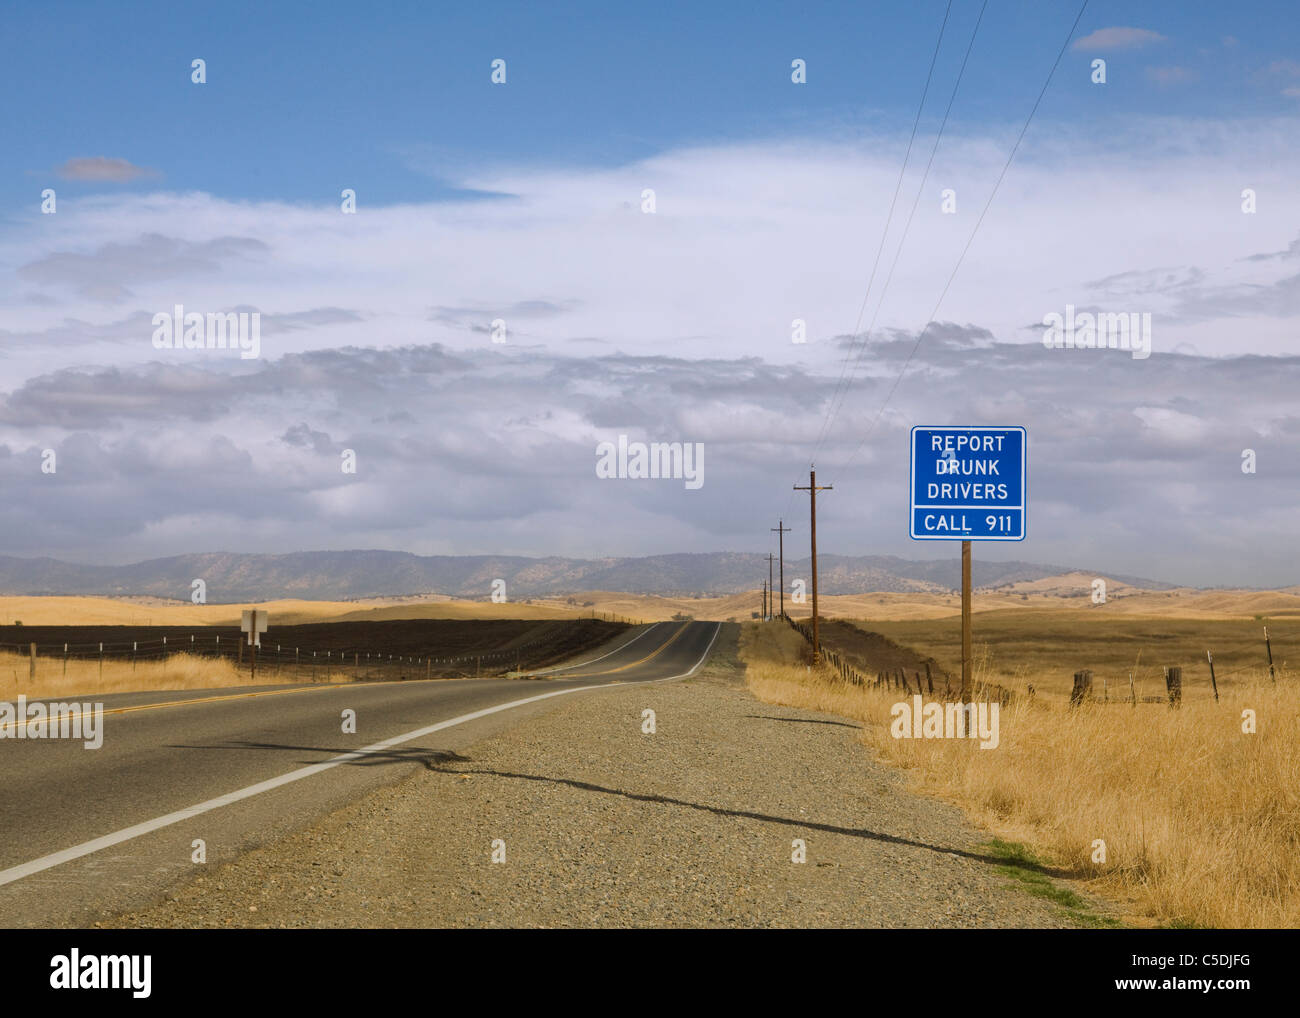 Report Drunk Drivers traffic safety sign on rural California highway Stock Photo